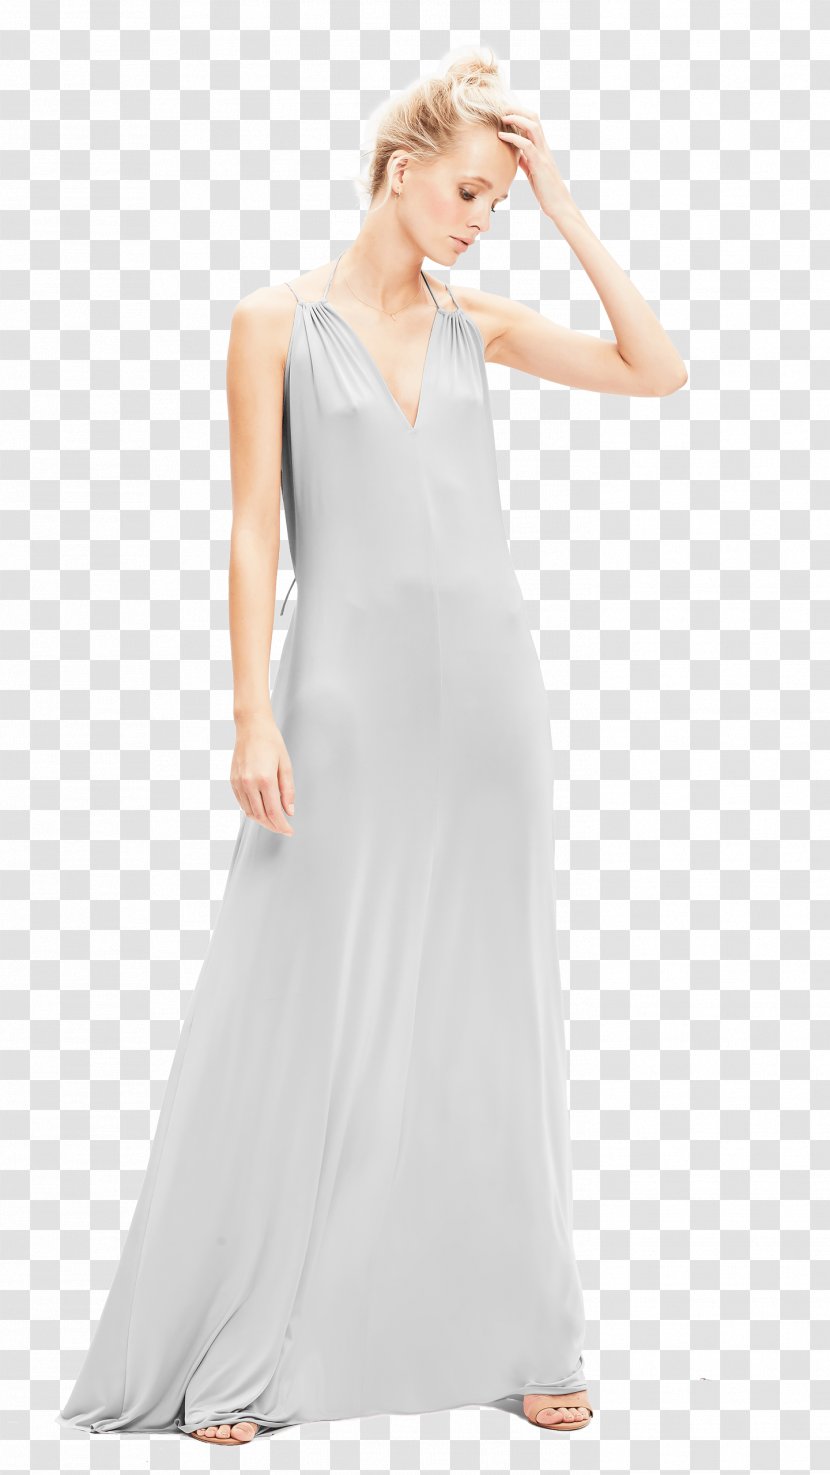 Wedding Dress Party Cocktail - Silhouette Transparent PNG